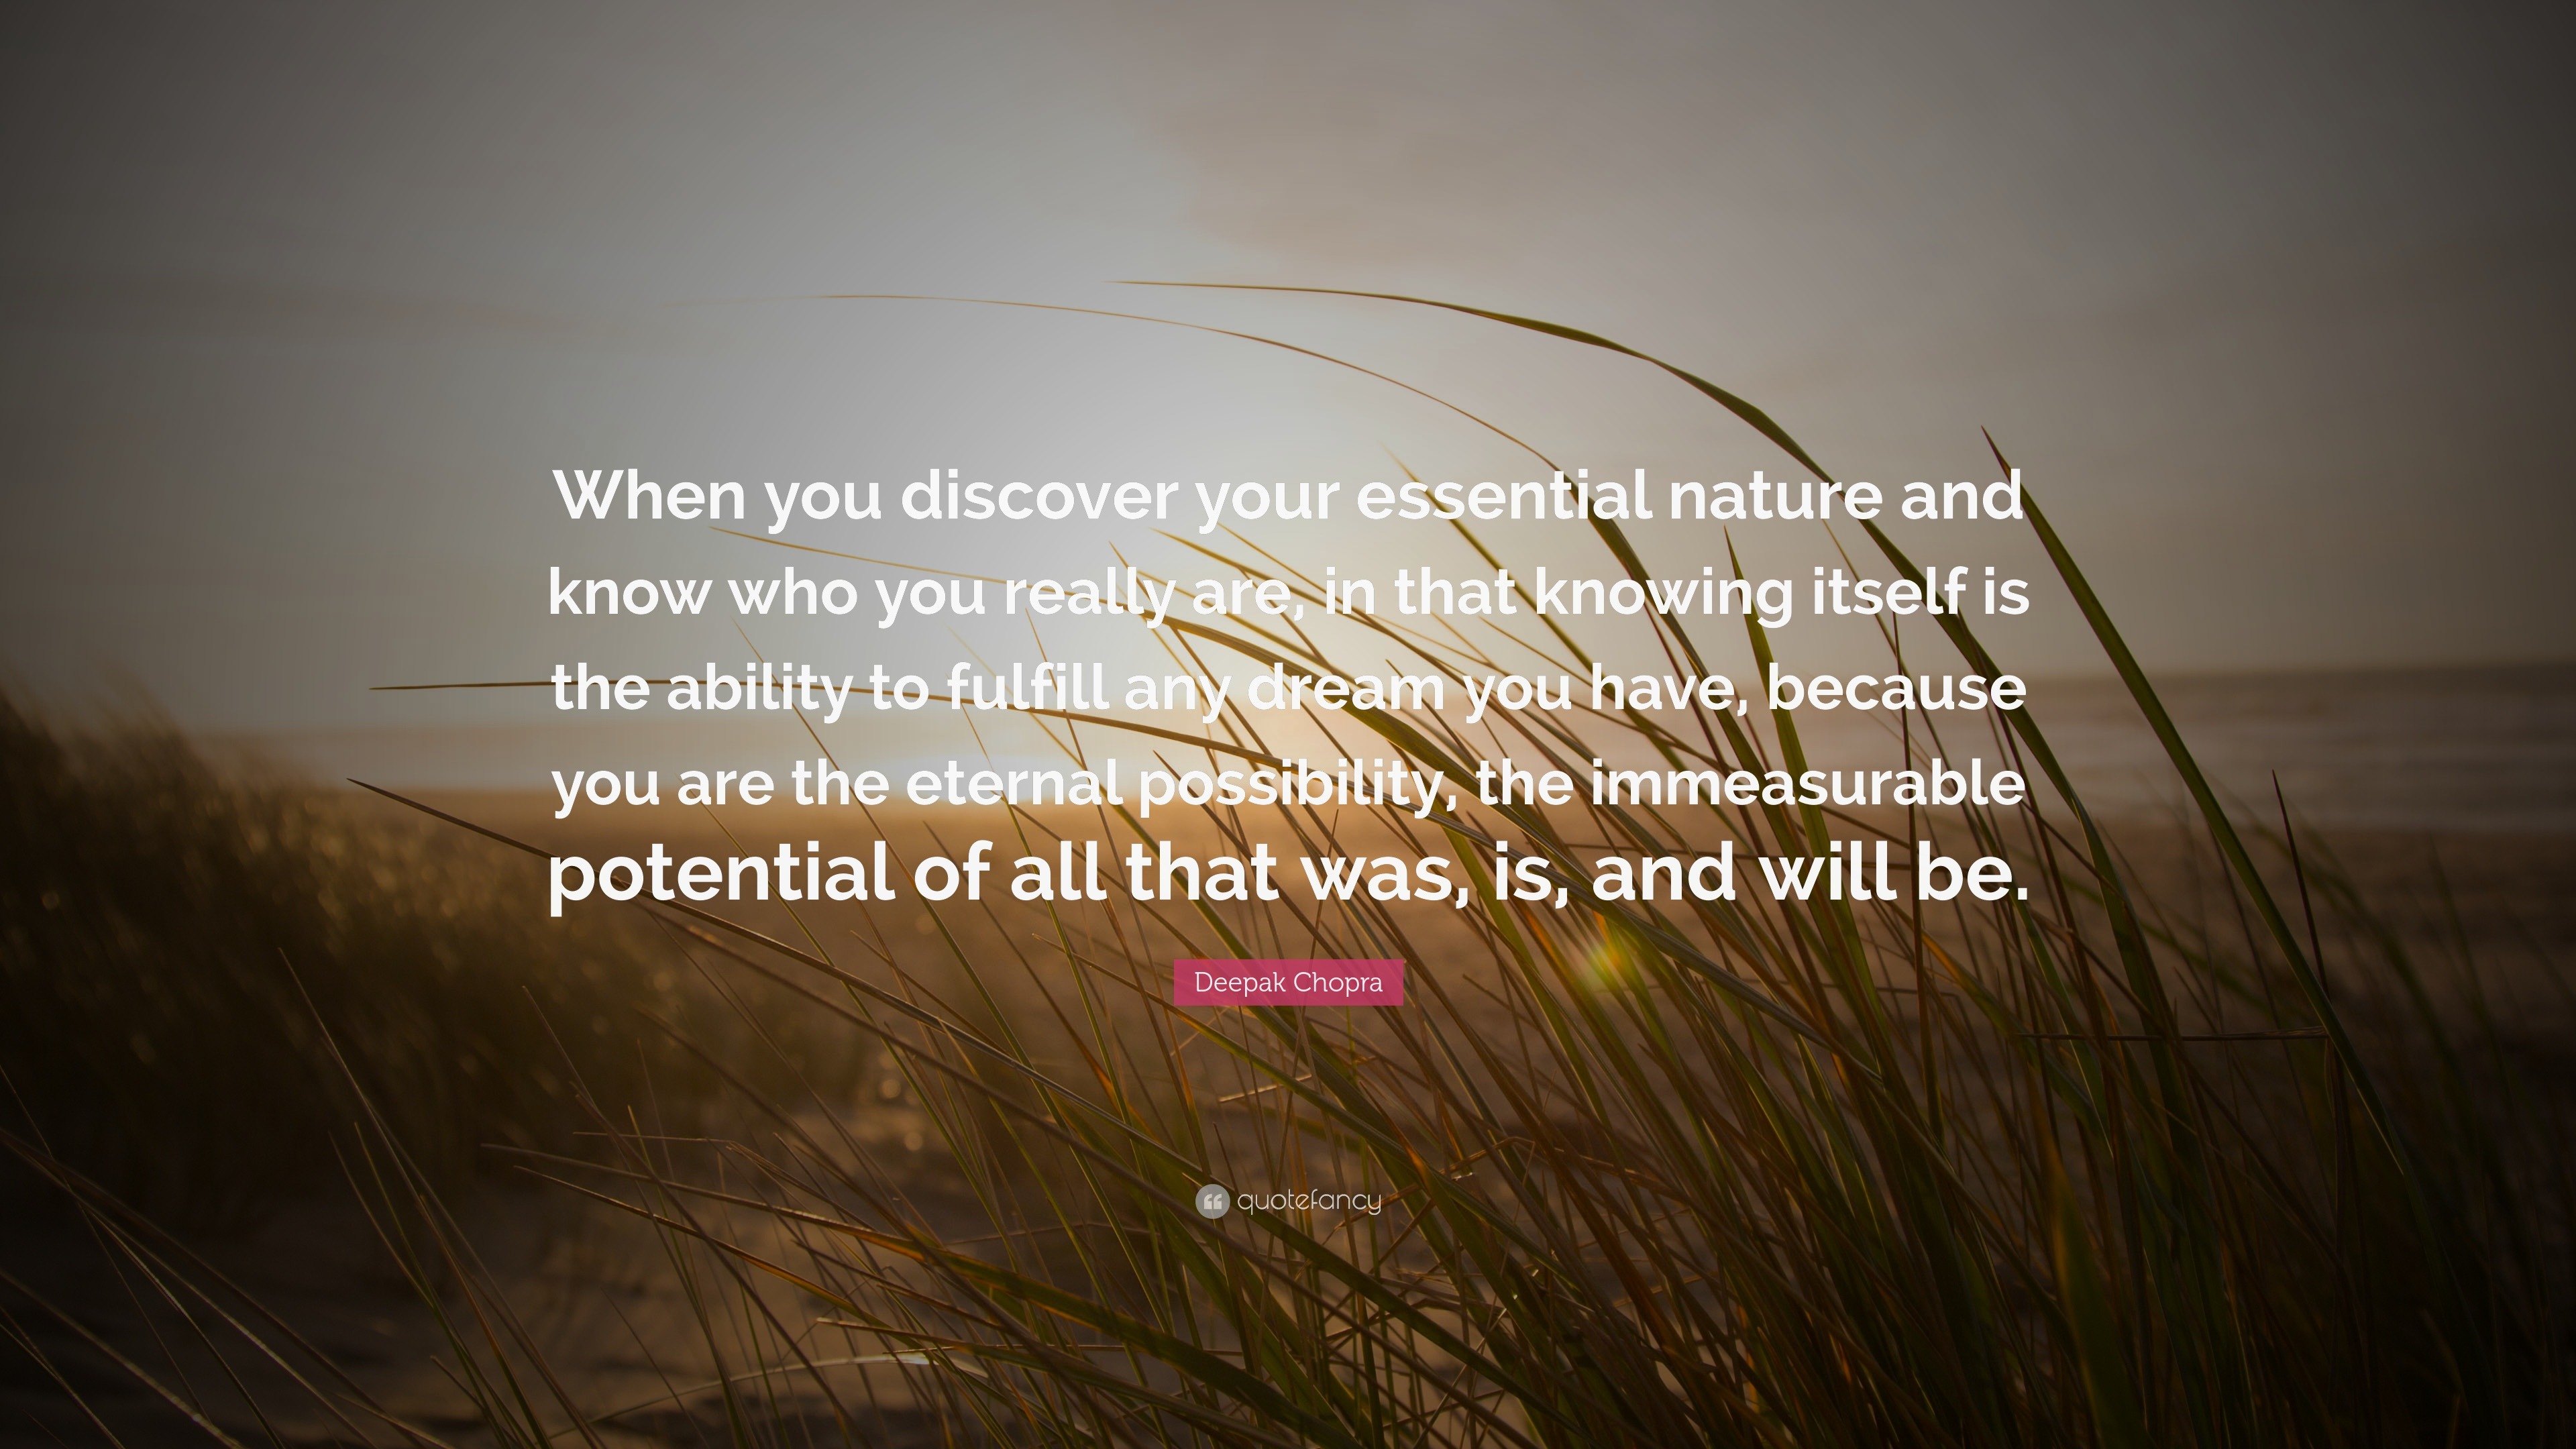 indhold trojansk hest kort Deepak Chopra Quote: “When you discover your essential nature and know who  you really are, in that knowing itself is the ability to fulfill an...”